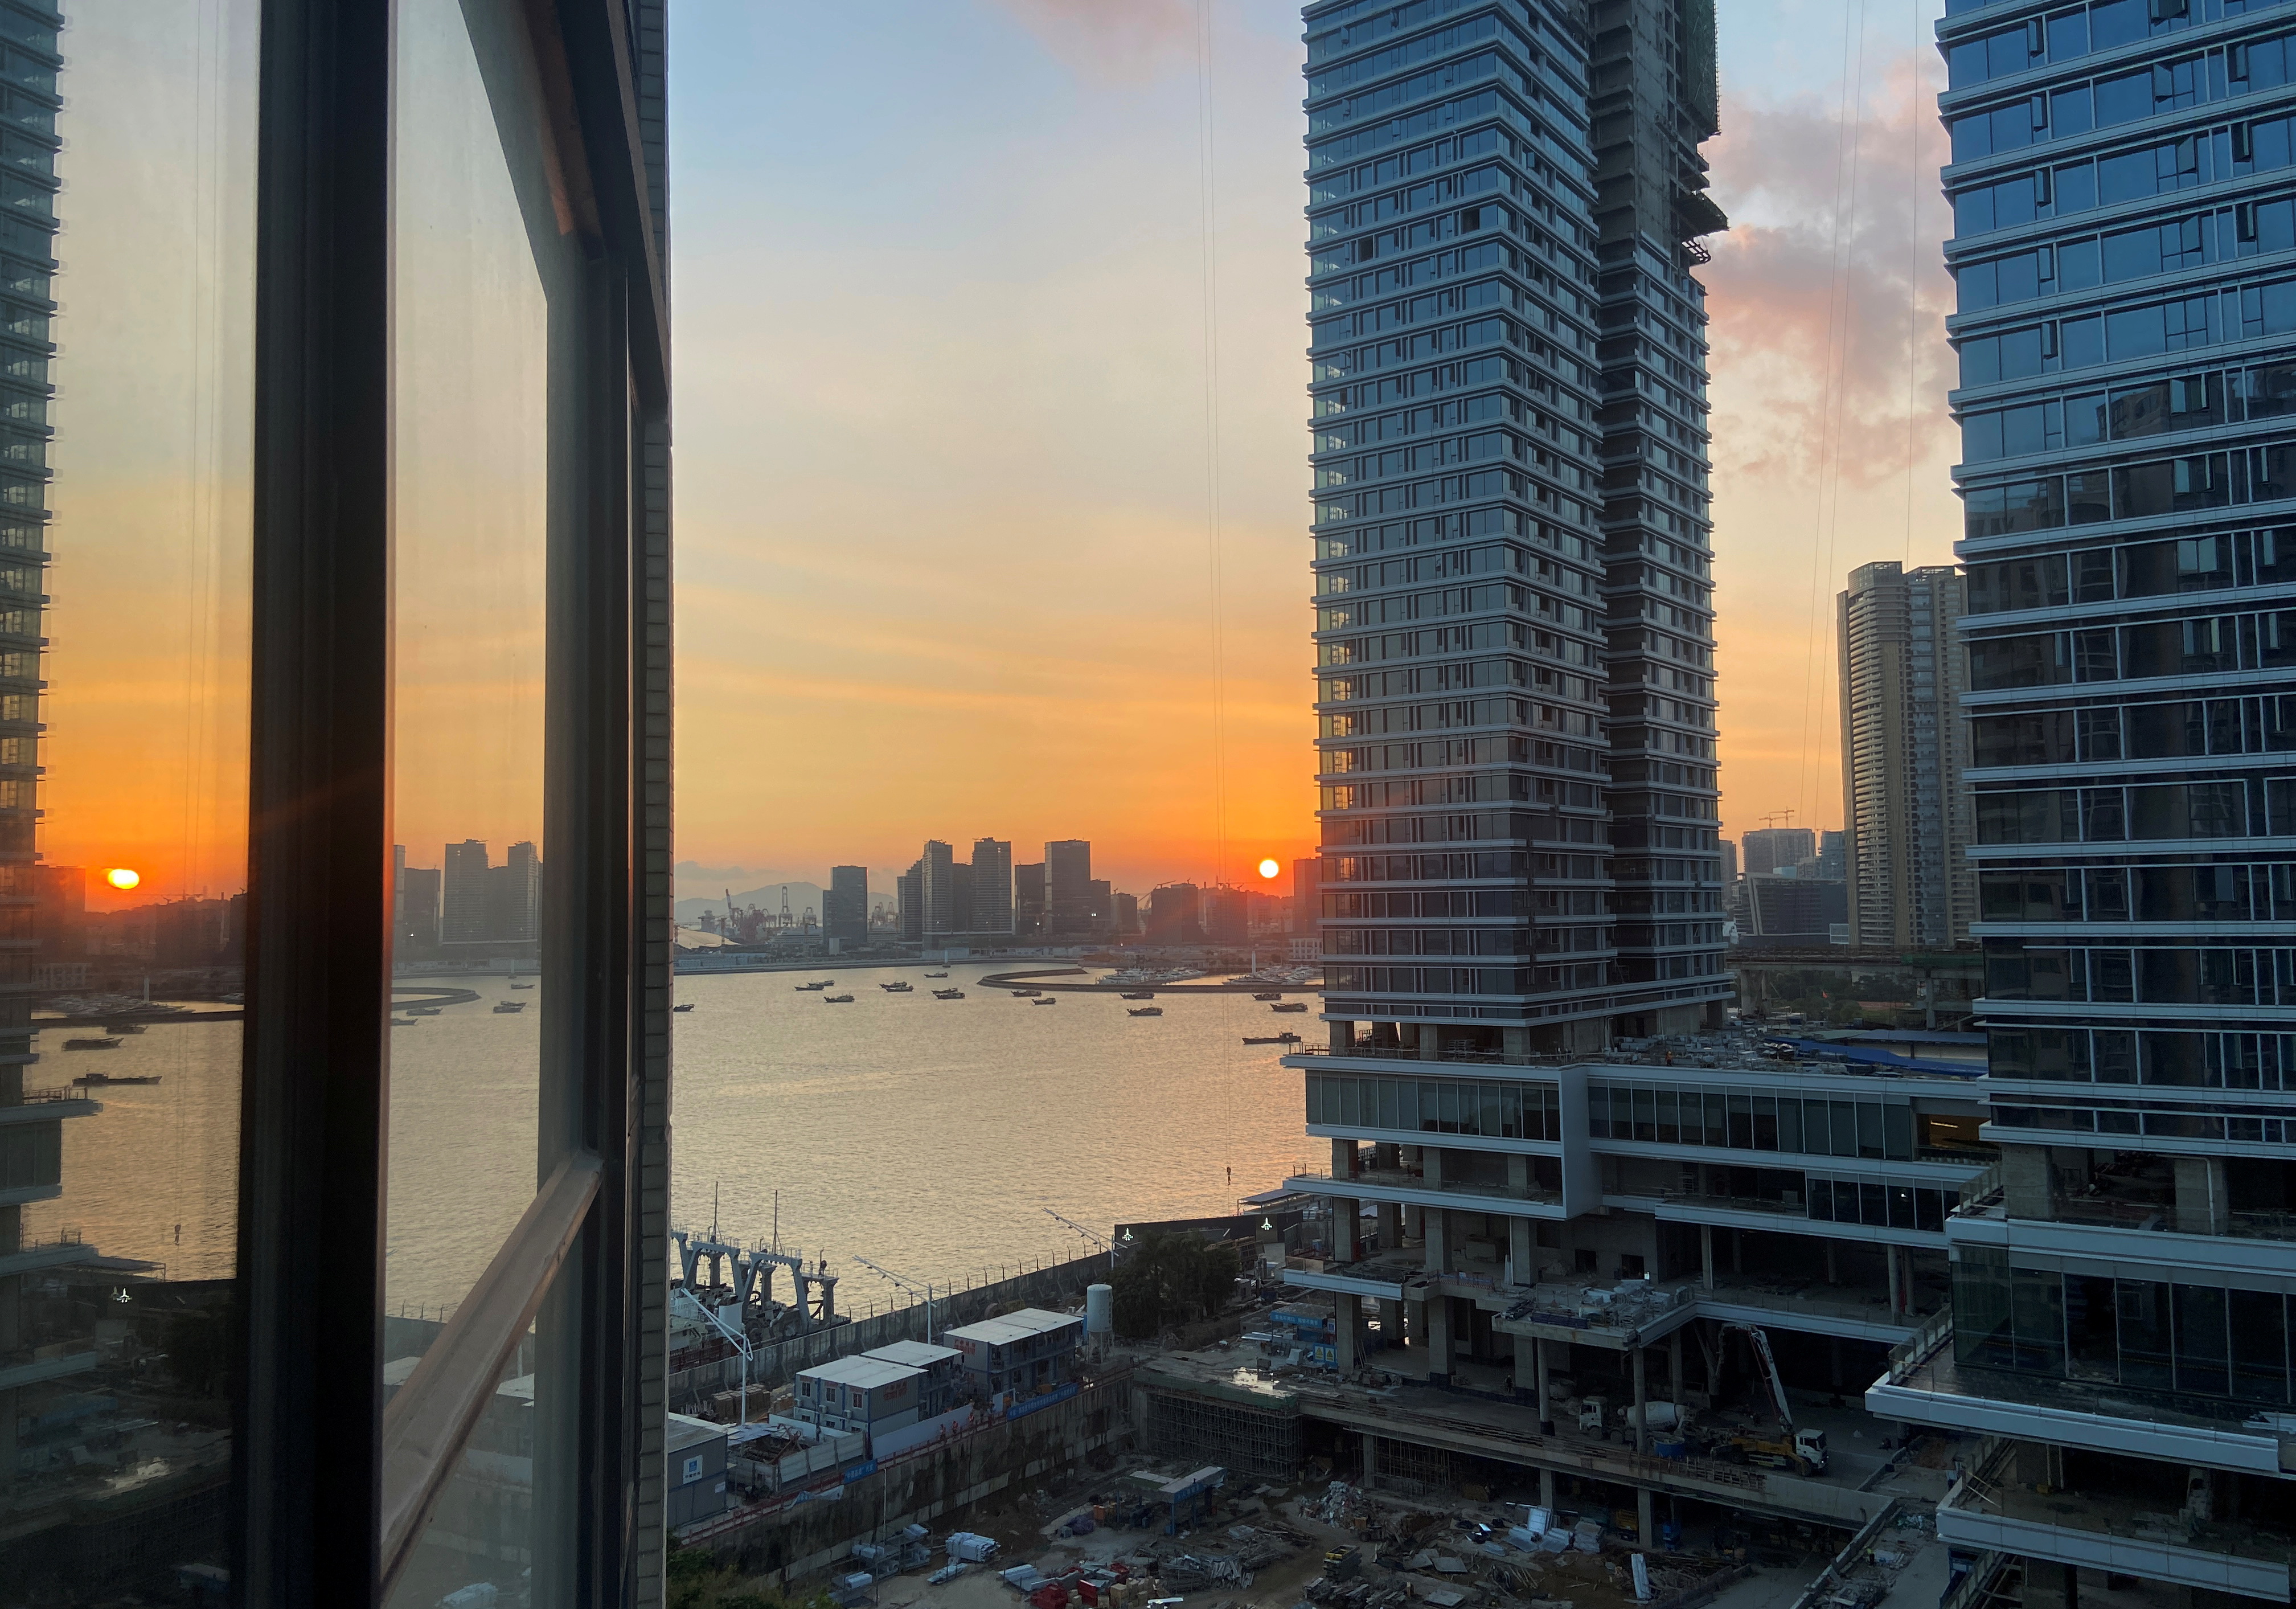 Under-construction apartments are pictured from a building during sunset in the Shekou area of Shenzhen, Guangdong province, China November 7, 2021. REUTERS/David Kirton